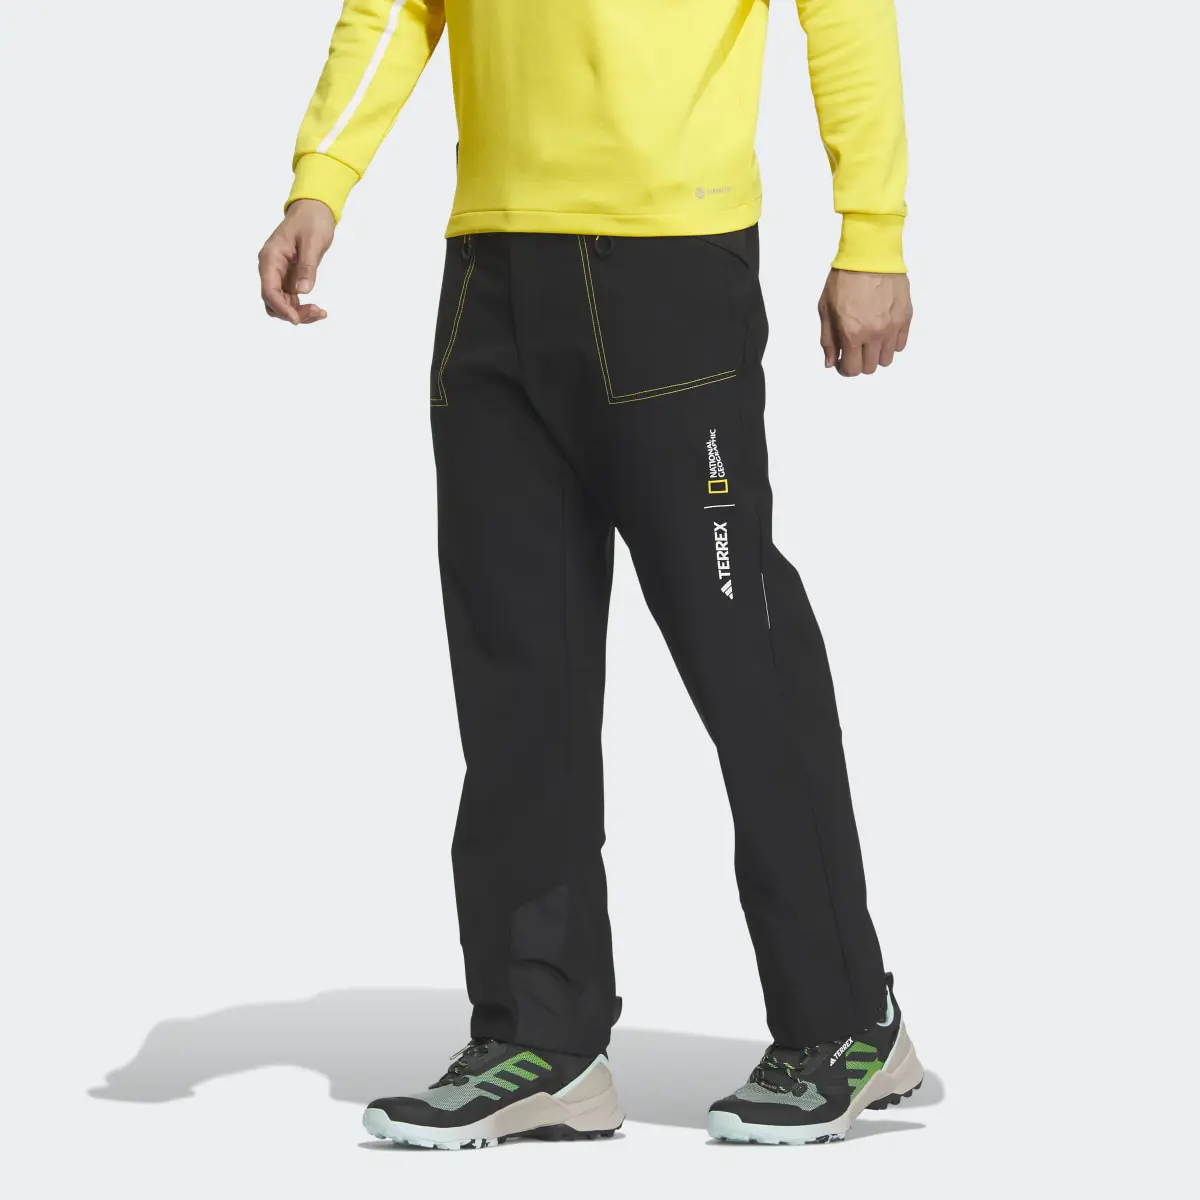 Adidas National Geographic Soft Shell Trousers. 1